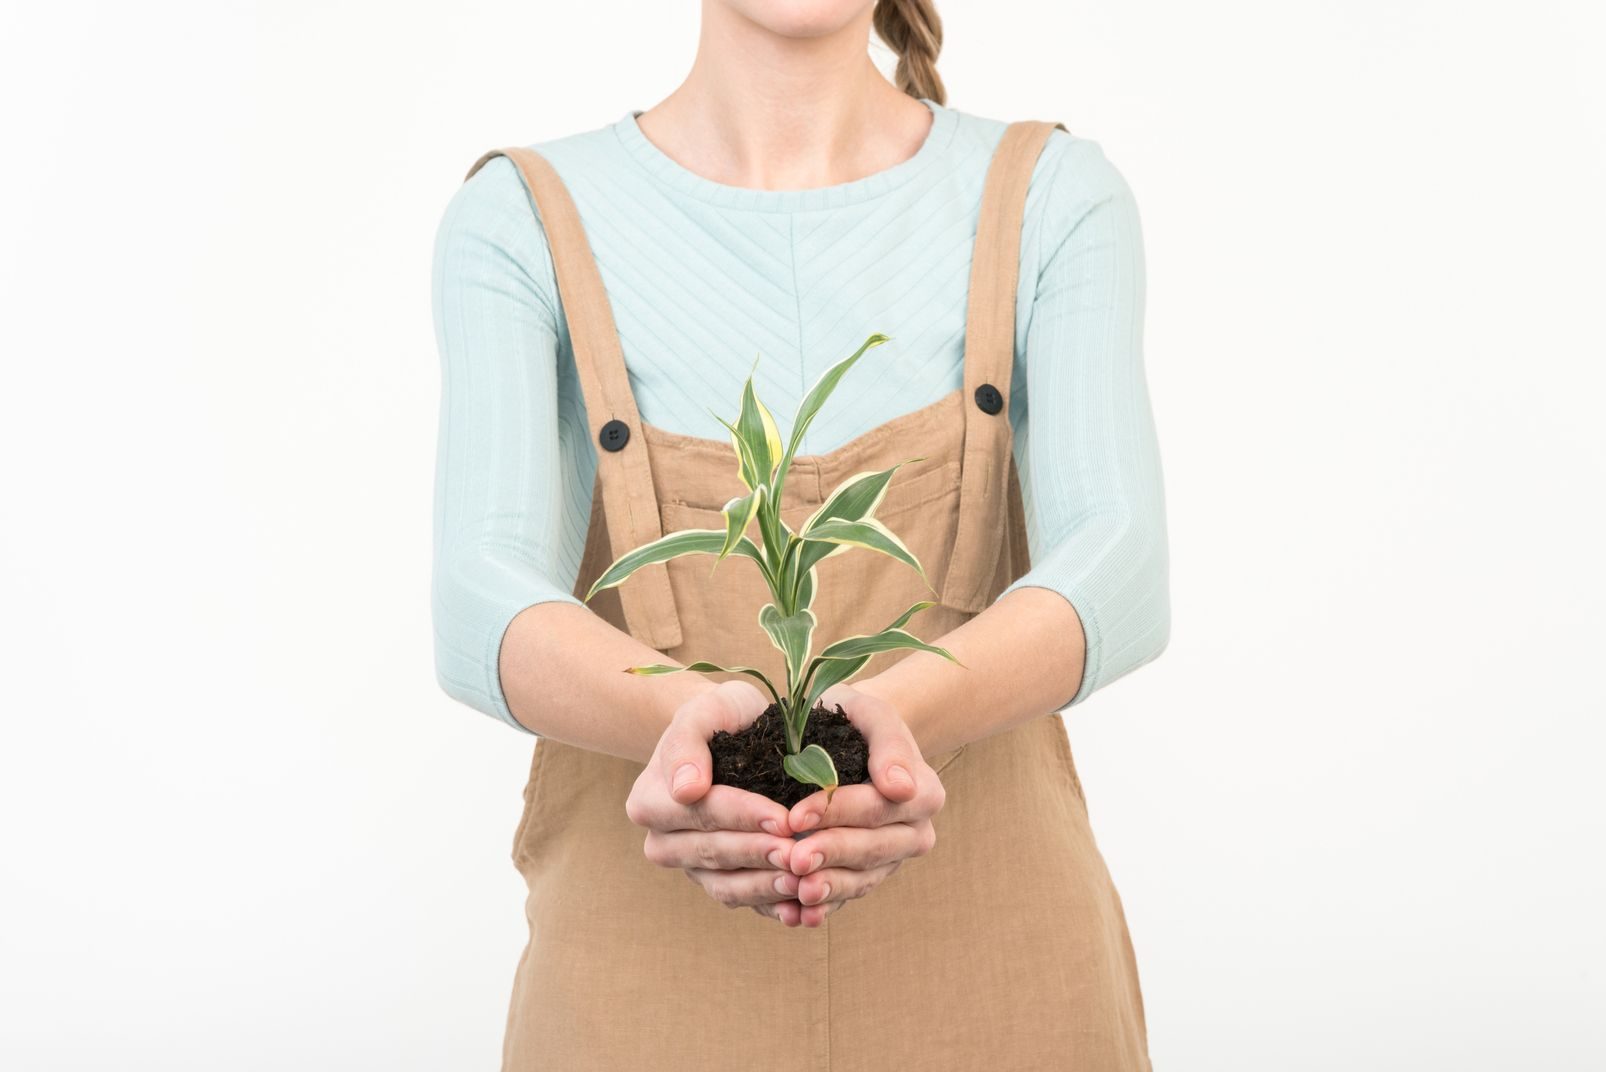 World Environment Day: Holding plant